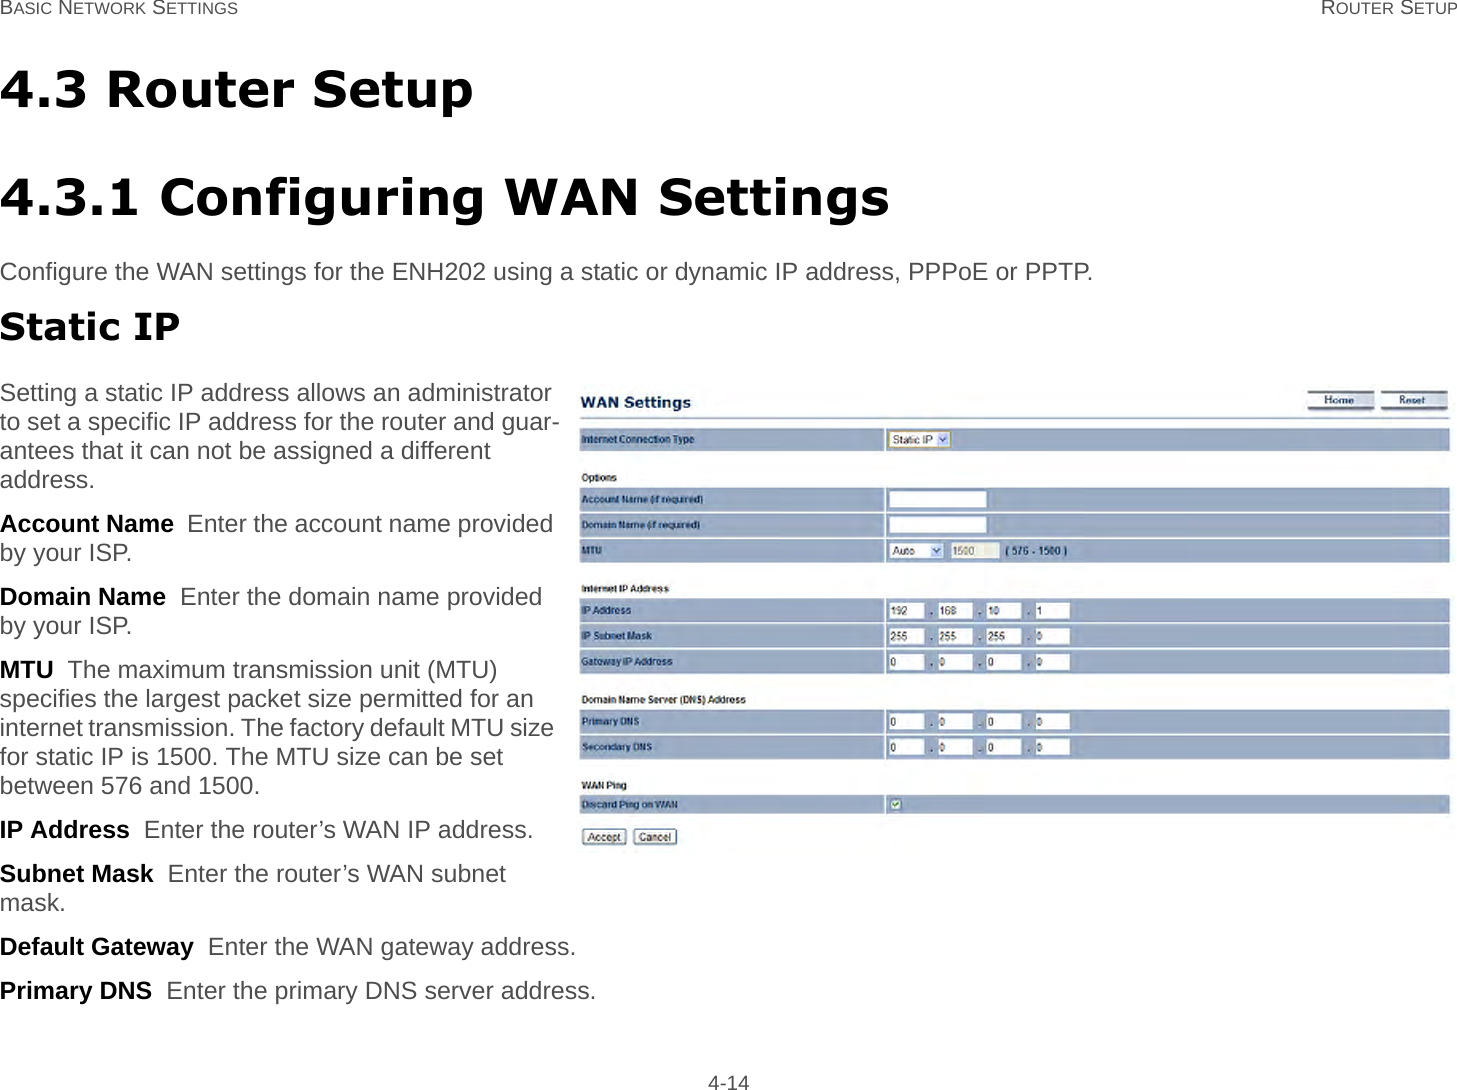 BASIC NETWORK SETTINGS ROUTER SETUP 4-144.3 Router Setup4.3.1 Configuring WAN SettingsConfigure the WAN settings for the ENH202 using a static or dynamic IP address, PPPoE or PPTP.Static IPSetting a static IP address allows an administrator to set a specific IP address for the router and guar-antees that it can not be assigned a different address.Account Name  Enter the account name provided by your ISP.Domain Name  Enter the domain name provided by your ISP.MTU  The maximum transmission unit (MTU) specifies the largest packet size permitted for an internet transmission. The factory default MTU size for static IP is 1500. The MTU size can be set between 576 and 1500.IP Address  Enter the router’s WAN IP address.Subnet Mask  Enter the router’s WAN subnet mask.Default Gateway  Enter the WAN gateway address.Primary DNS  Enter the primary DNS server address.